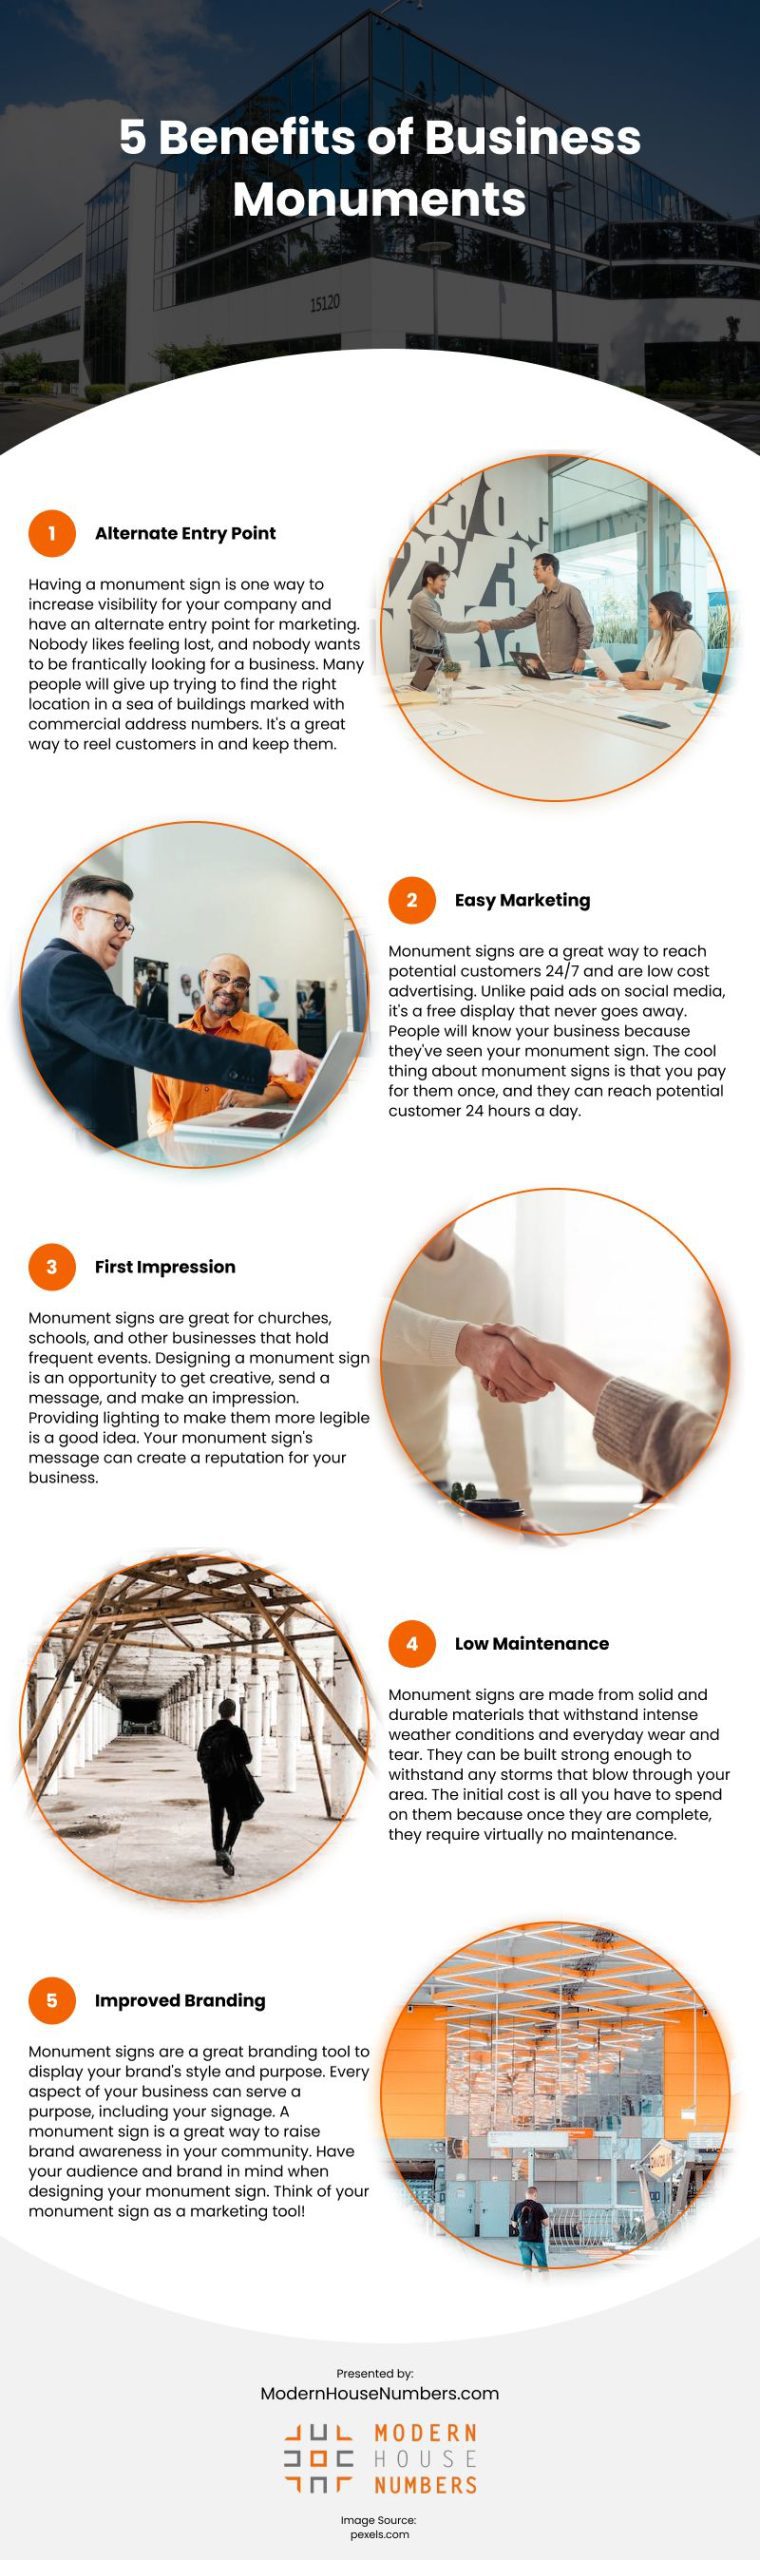 5 Benefits of Business Monuments Infographic